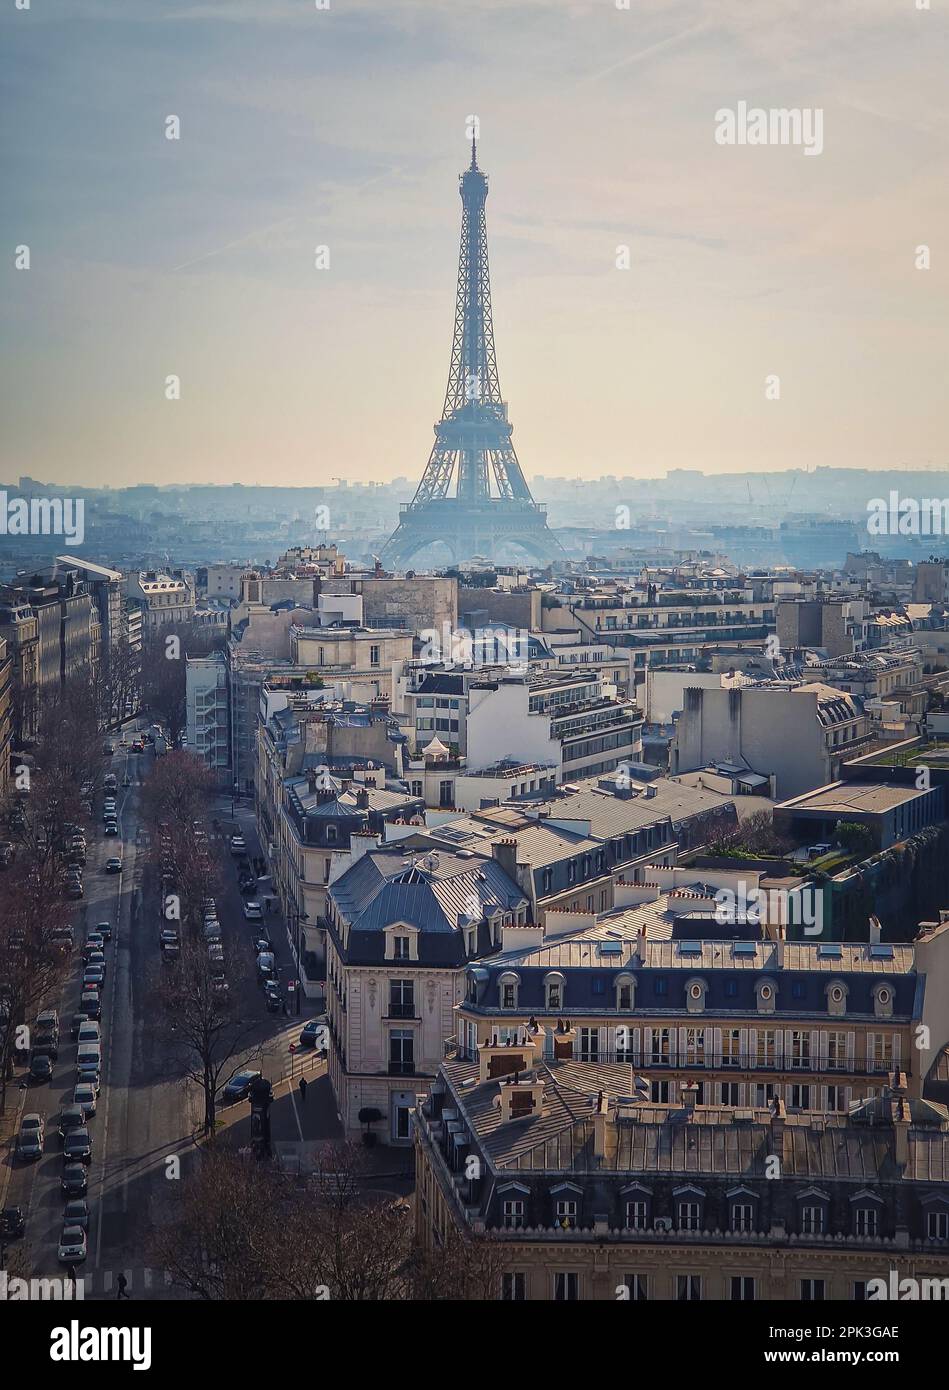 Paris cityscape with view to the Eiffel Tower, France. Beautiful parisian architecture with historic buildings, landmarks and busy city street. Aerial Stock Photo